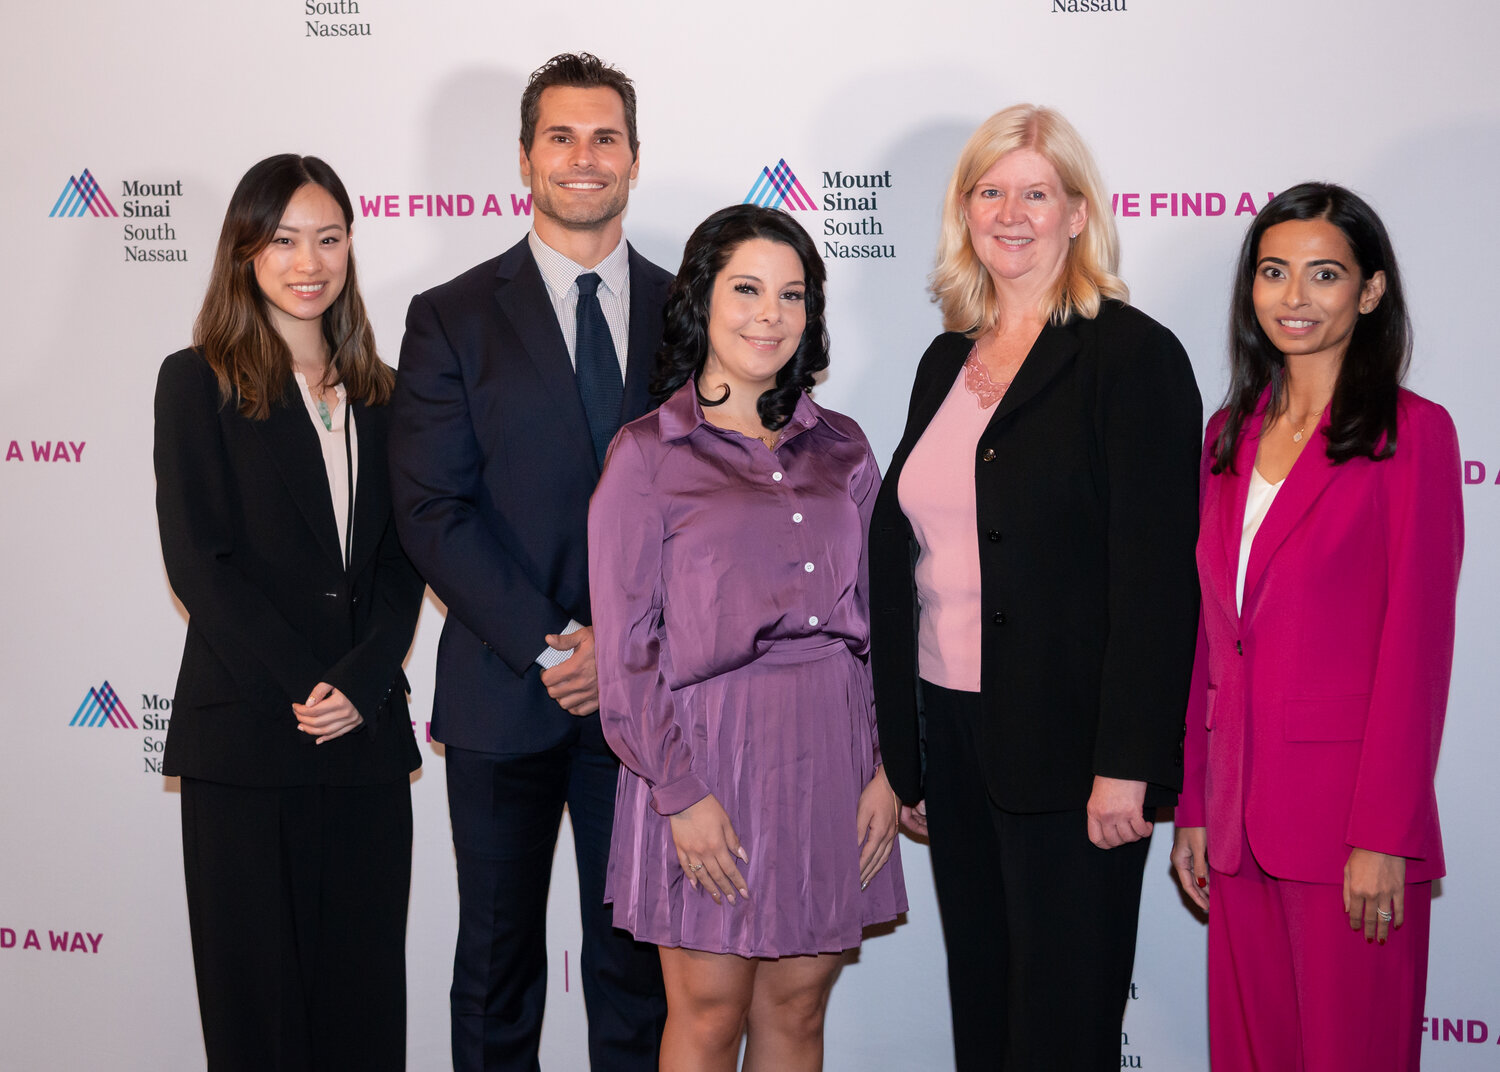 From left is Lillian Huang, surgical breast oncology fellow, Michael Zeidman, surgical breast oncologist, Angela Santopolo, of Howard Beach, Christine Hodyl, director of breast health services, at Mount Sinai South Nassau, Dhvani Thakker, director of women’s medical oncology at Mount Sinai South Nassau.